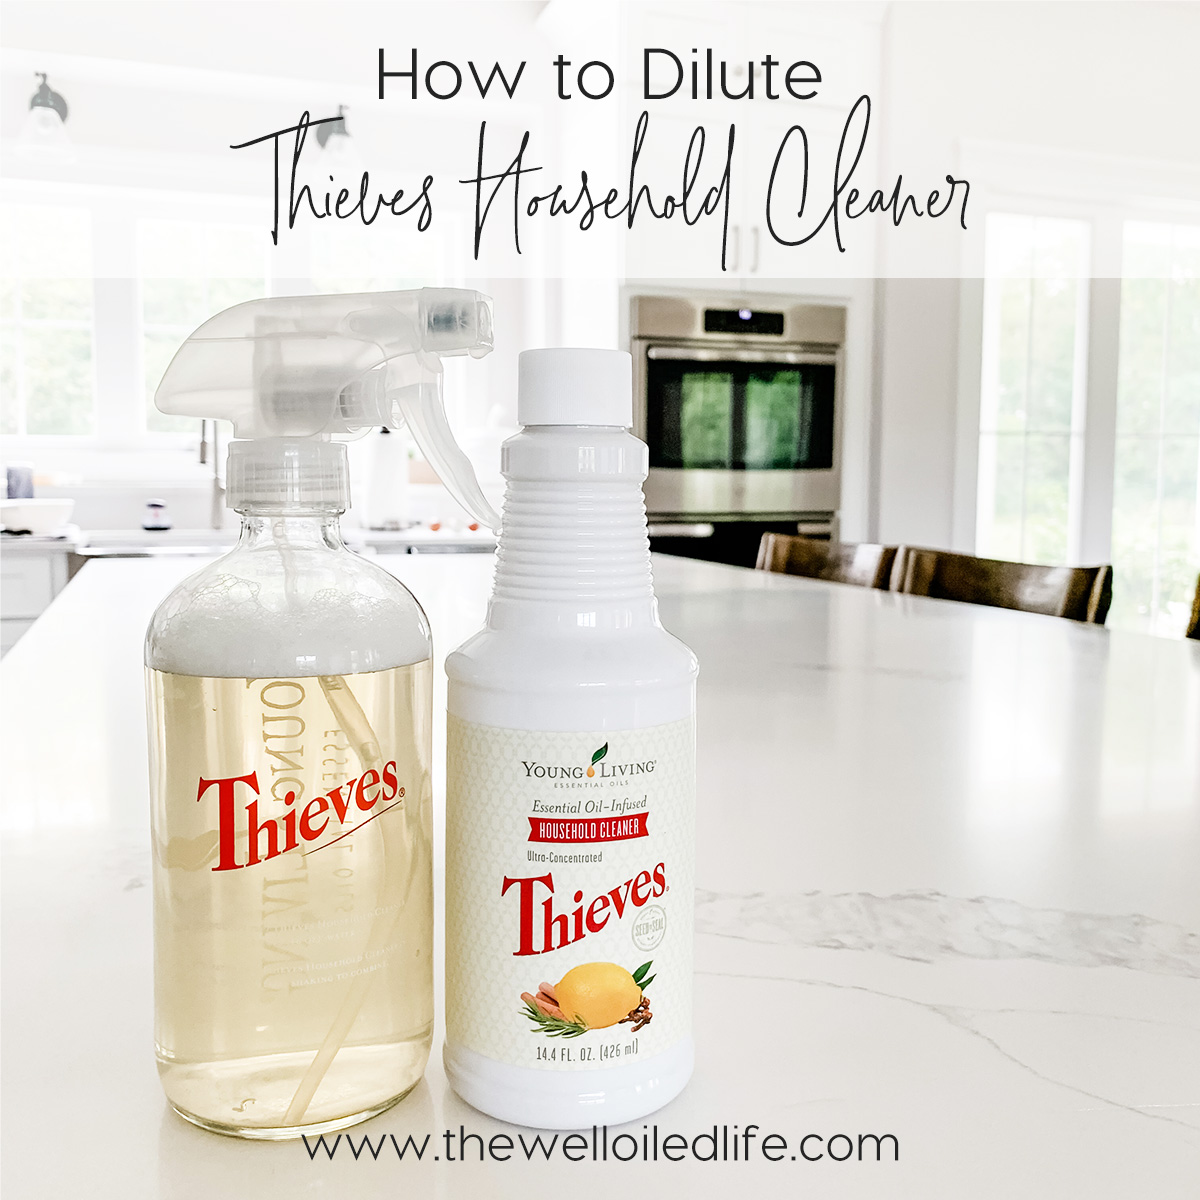 Young Living Thieves Household Cleaners 